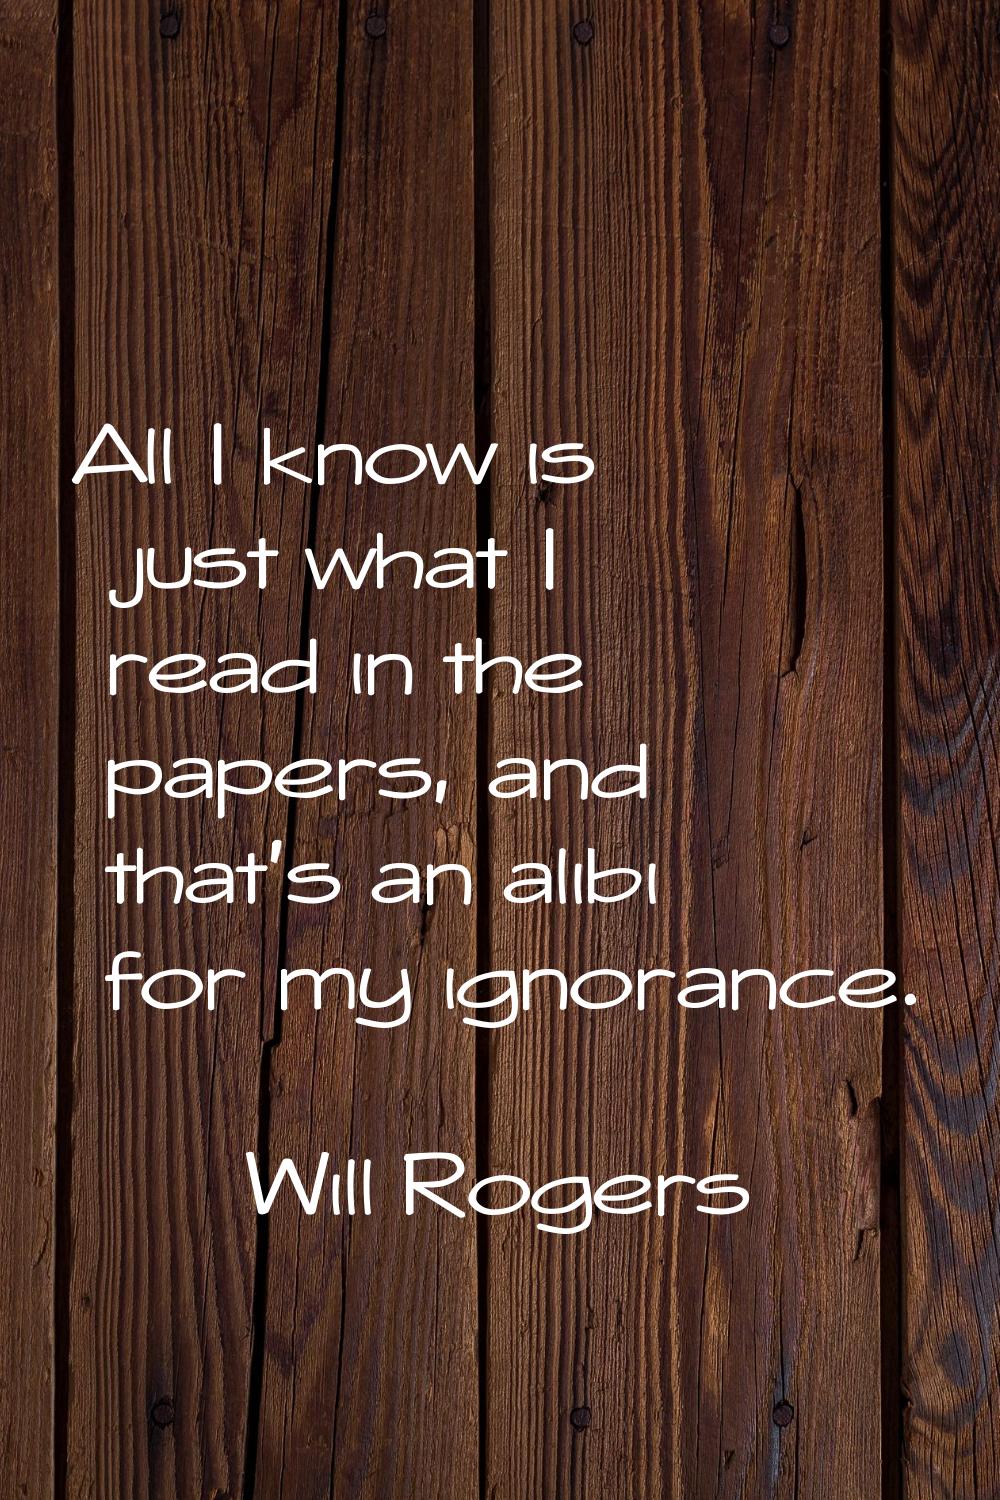 All I know is just what I read in the papers, and that's an alibi for my ignorance.